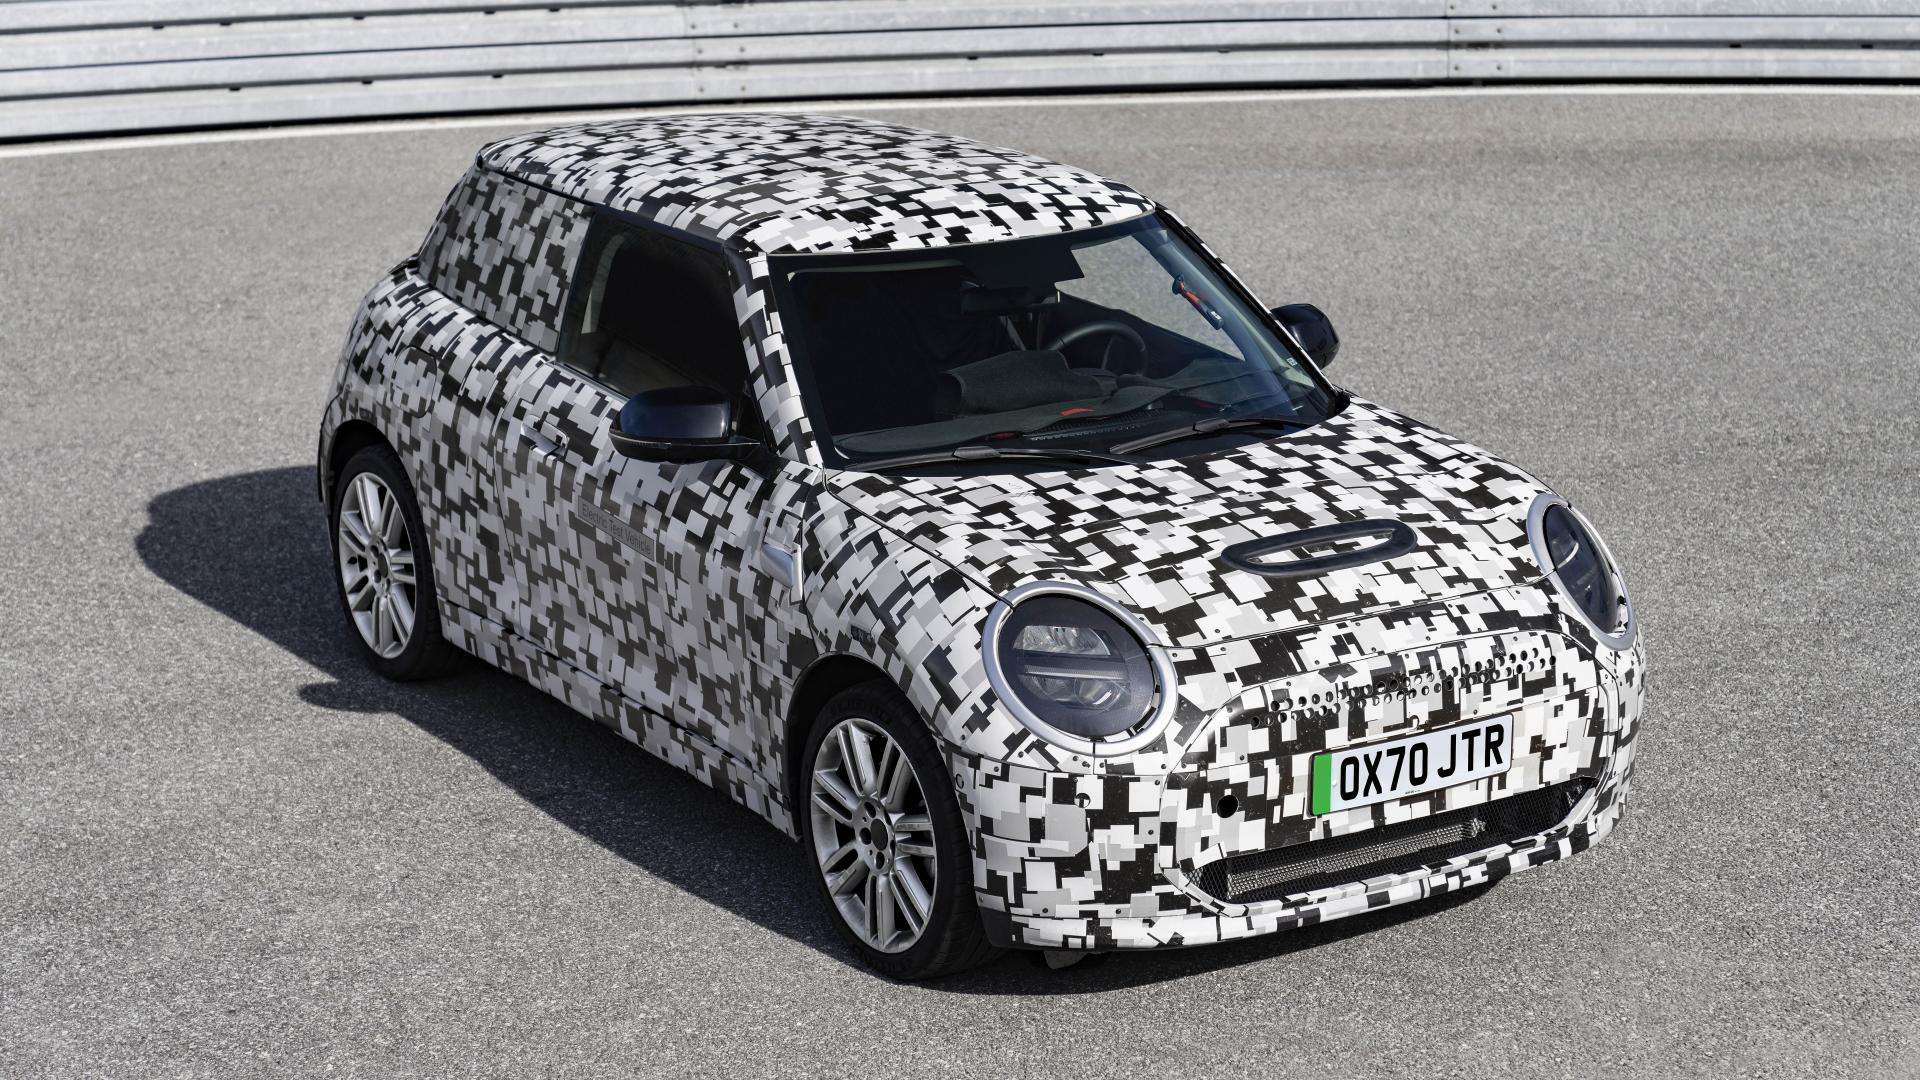 TopGear | Here’s your first look at the next-gen MINI hatch